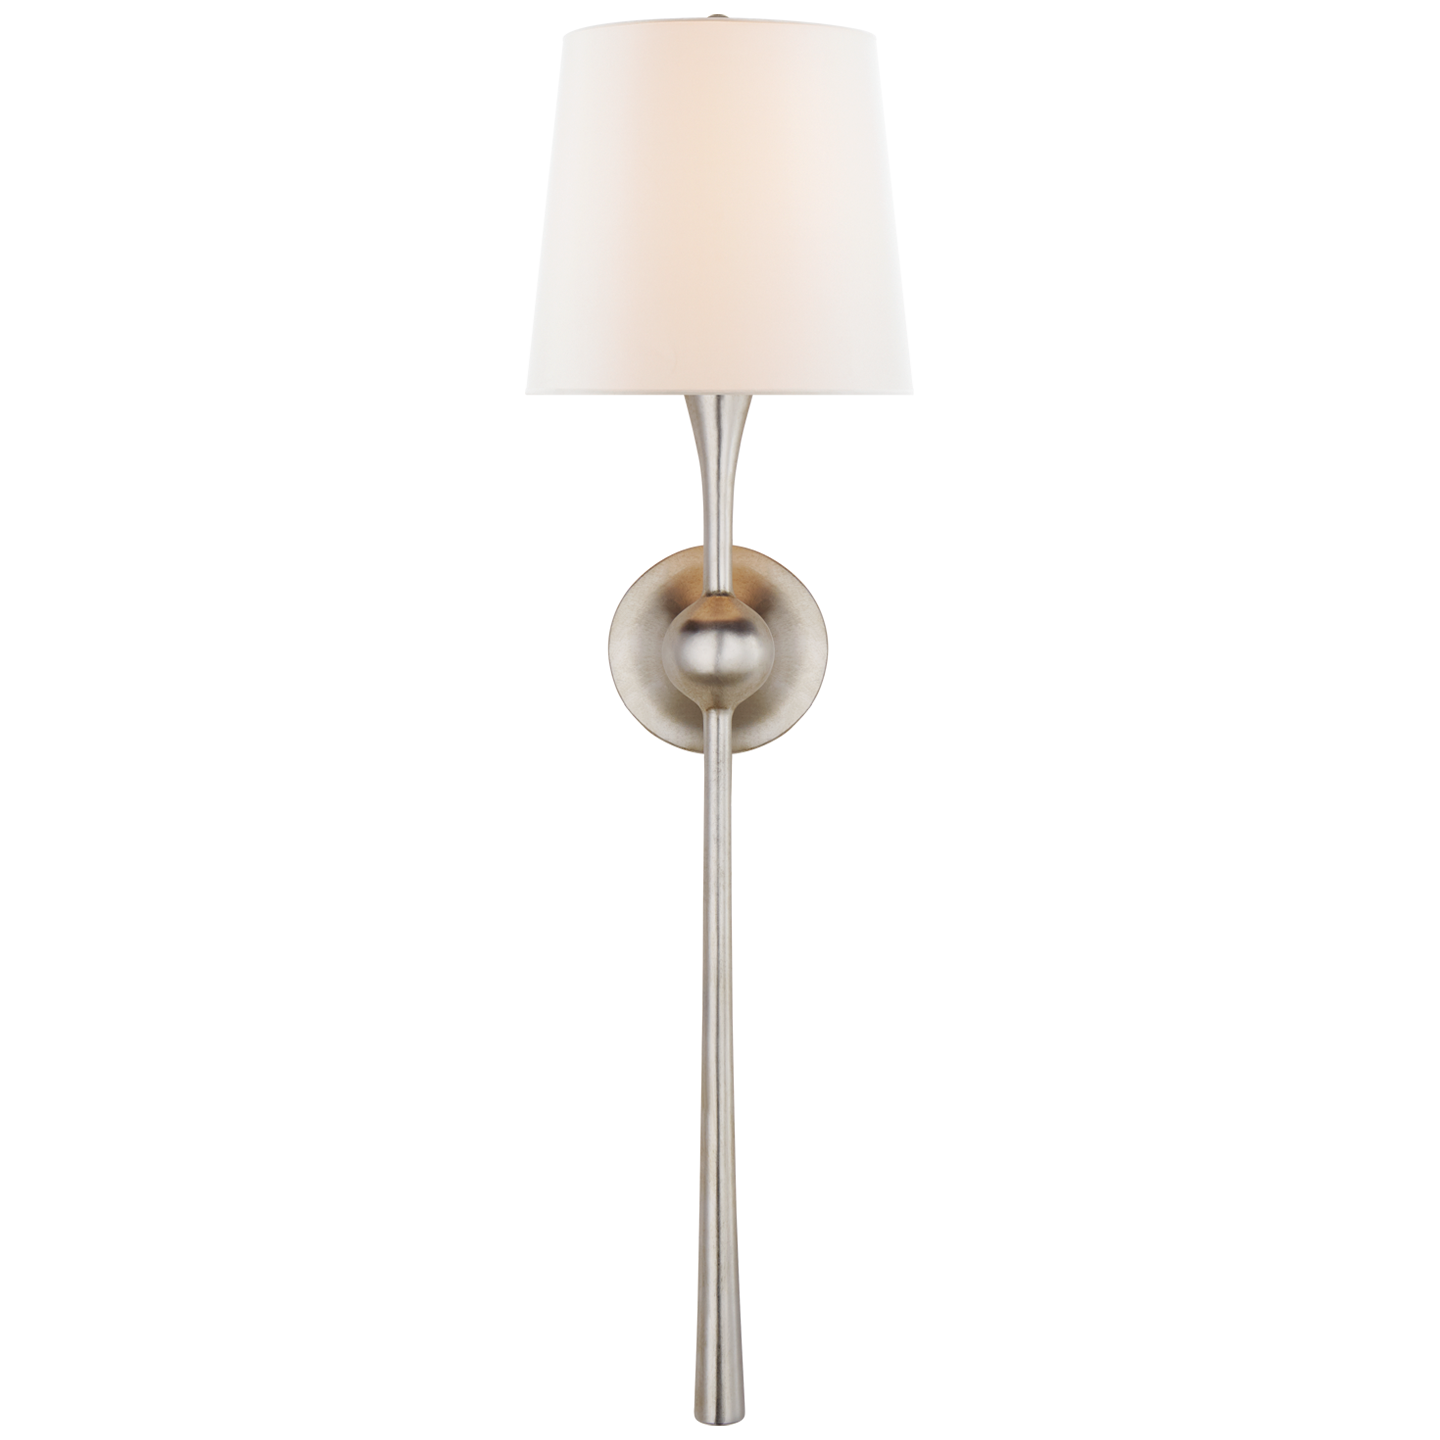 Dover Large Wall Lamp - Silver